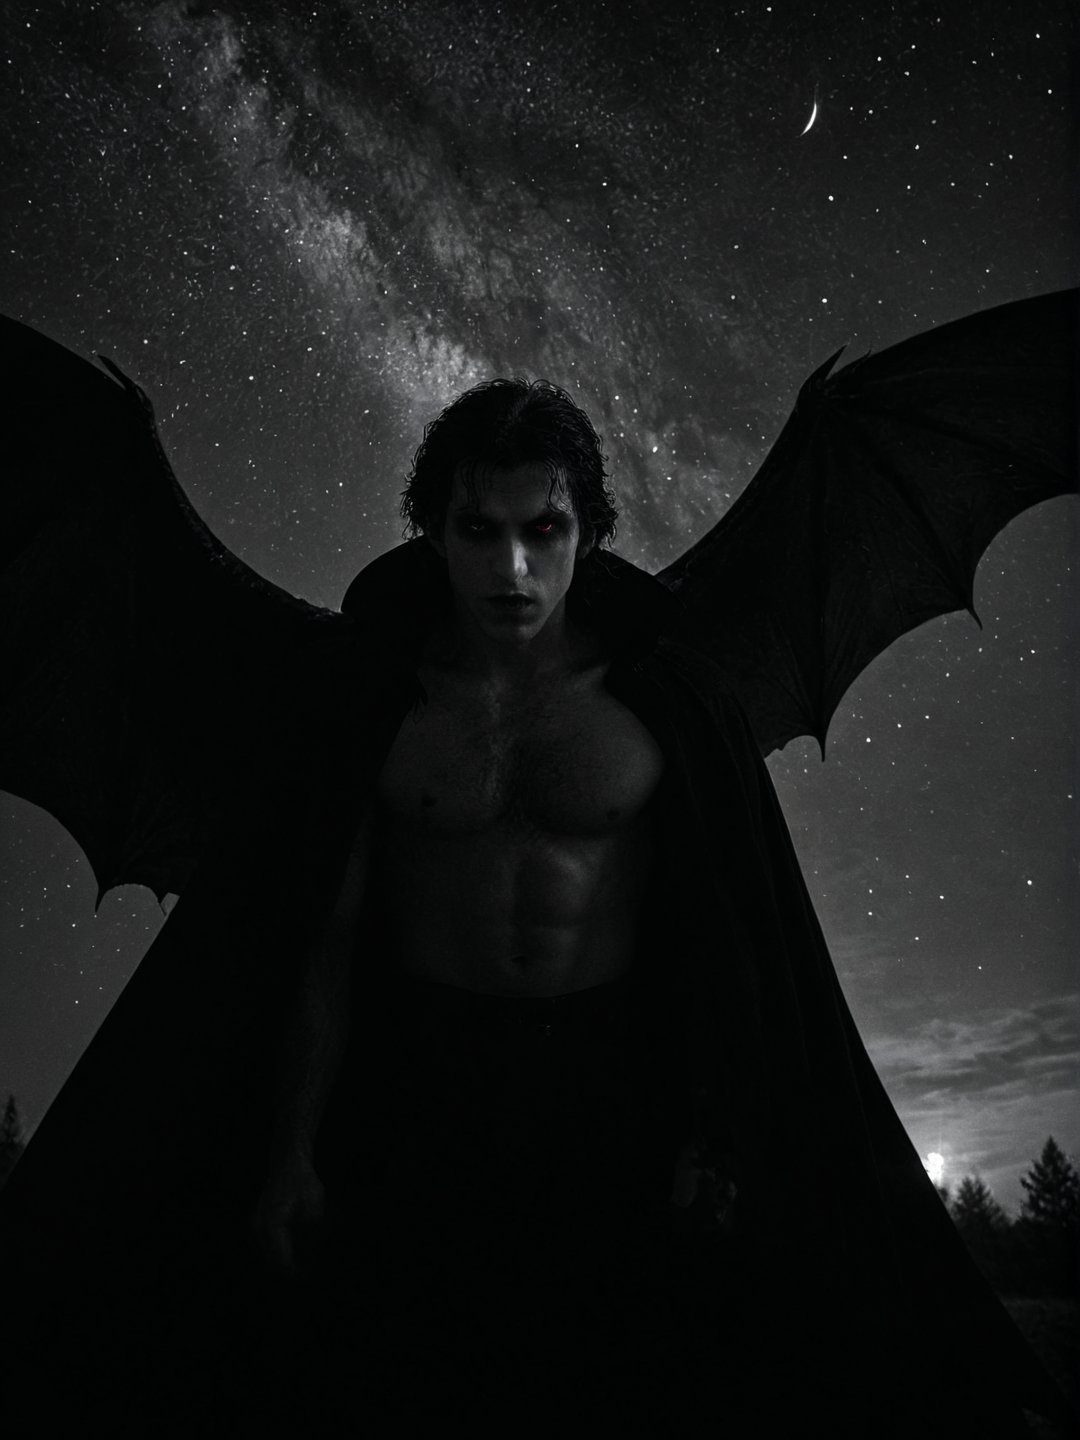 Realism, digital black and white photo, portrait, wide angle of view, The starry sky, the silhouette of a vampire with wings, eyes glow red,, dramatic darknes,